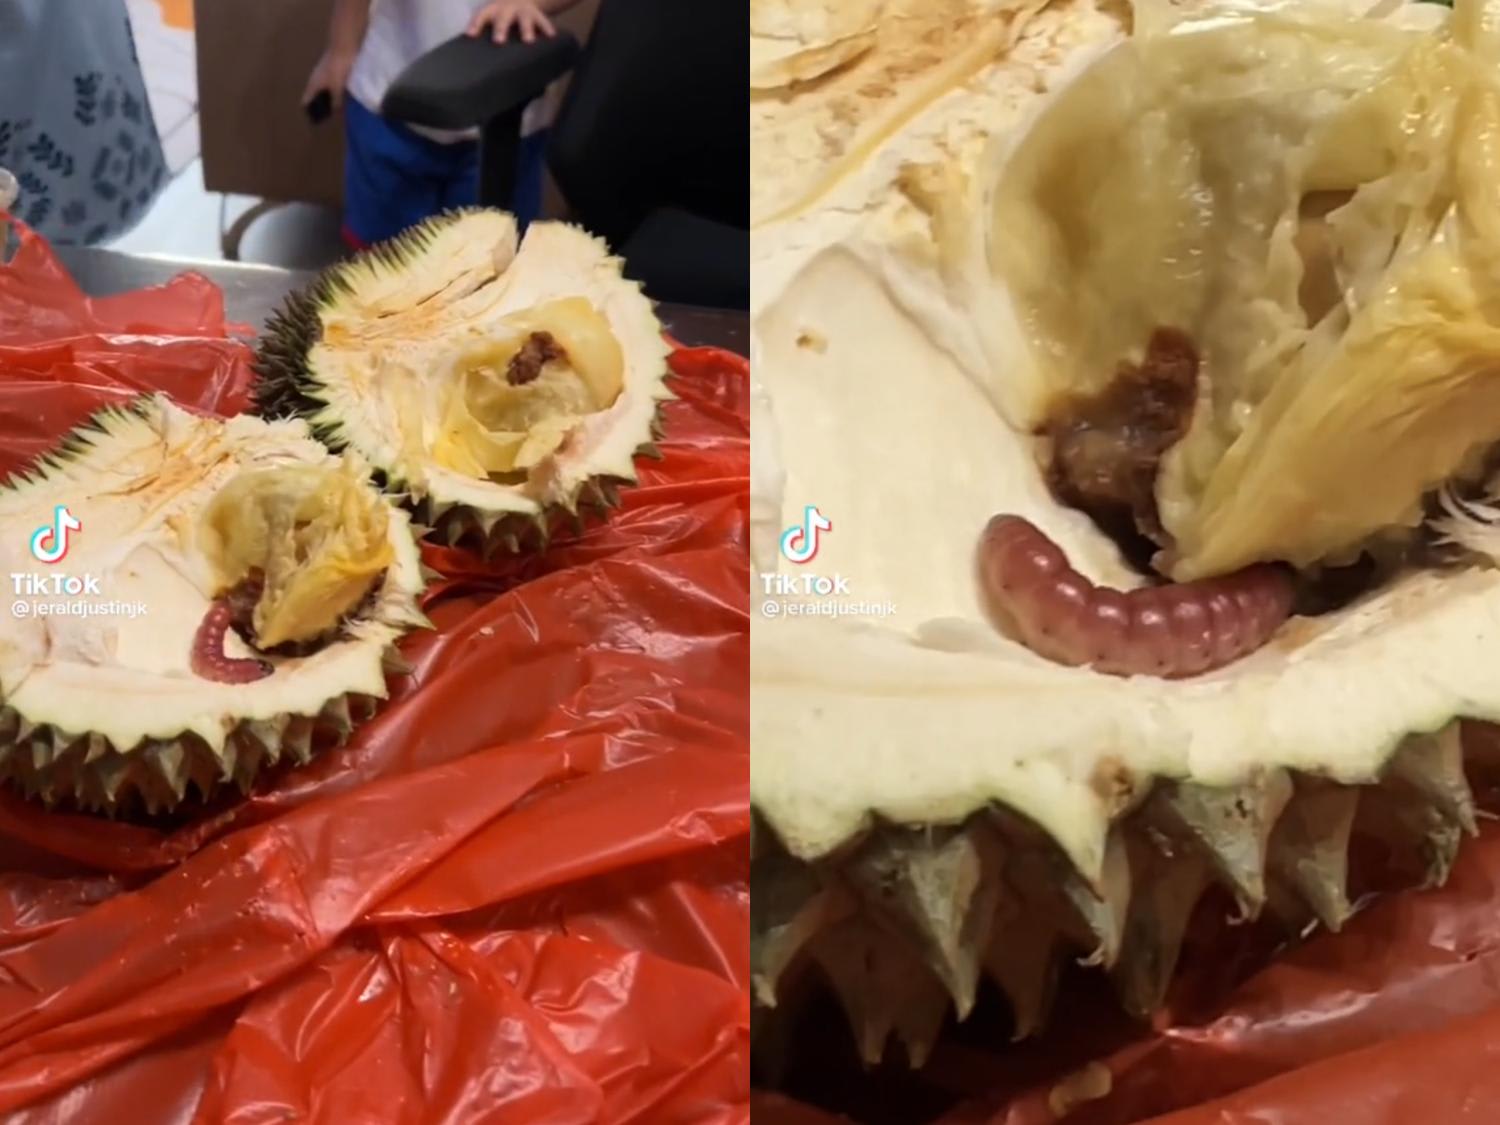 A critter that appears to be a type of caterpillar known as a durian fruit borer was found wriggling in the fruit by local radio DJ, Jerald&nbsp;Justin Ko's mother.